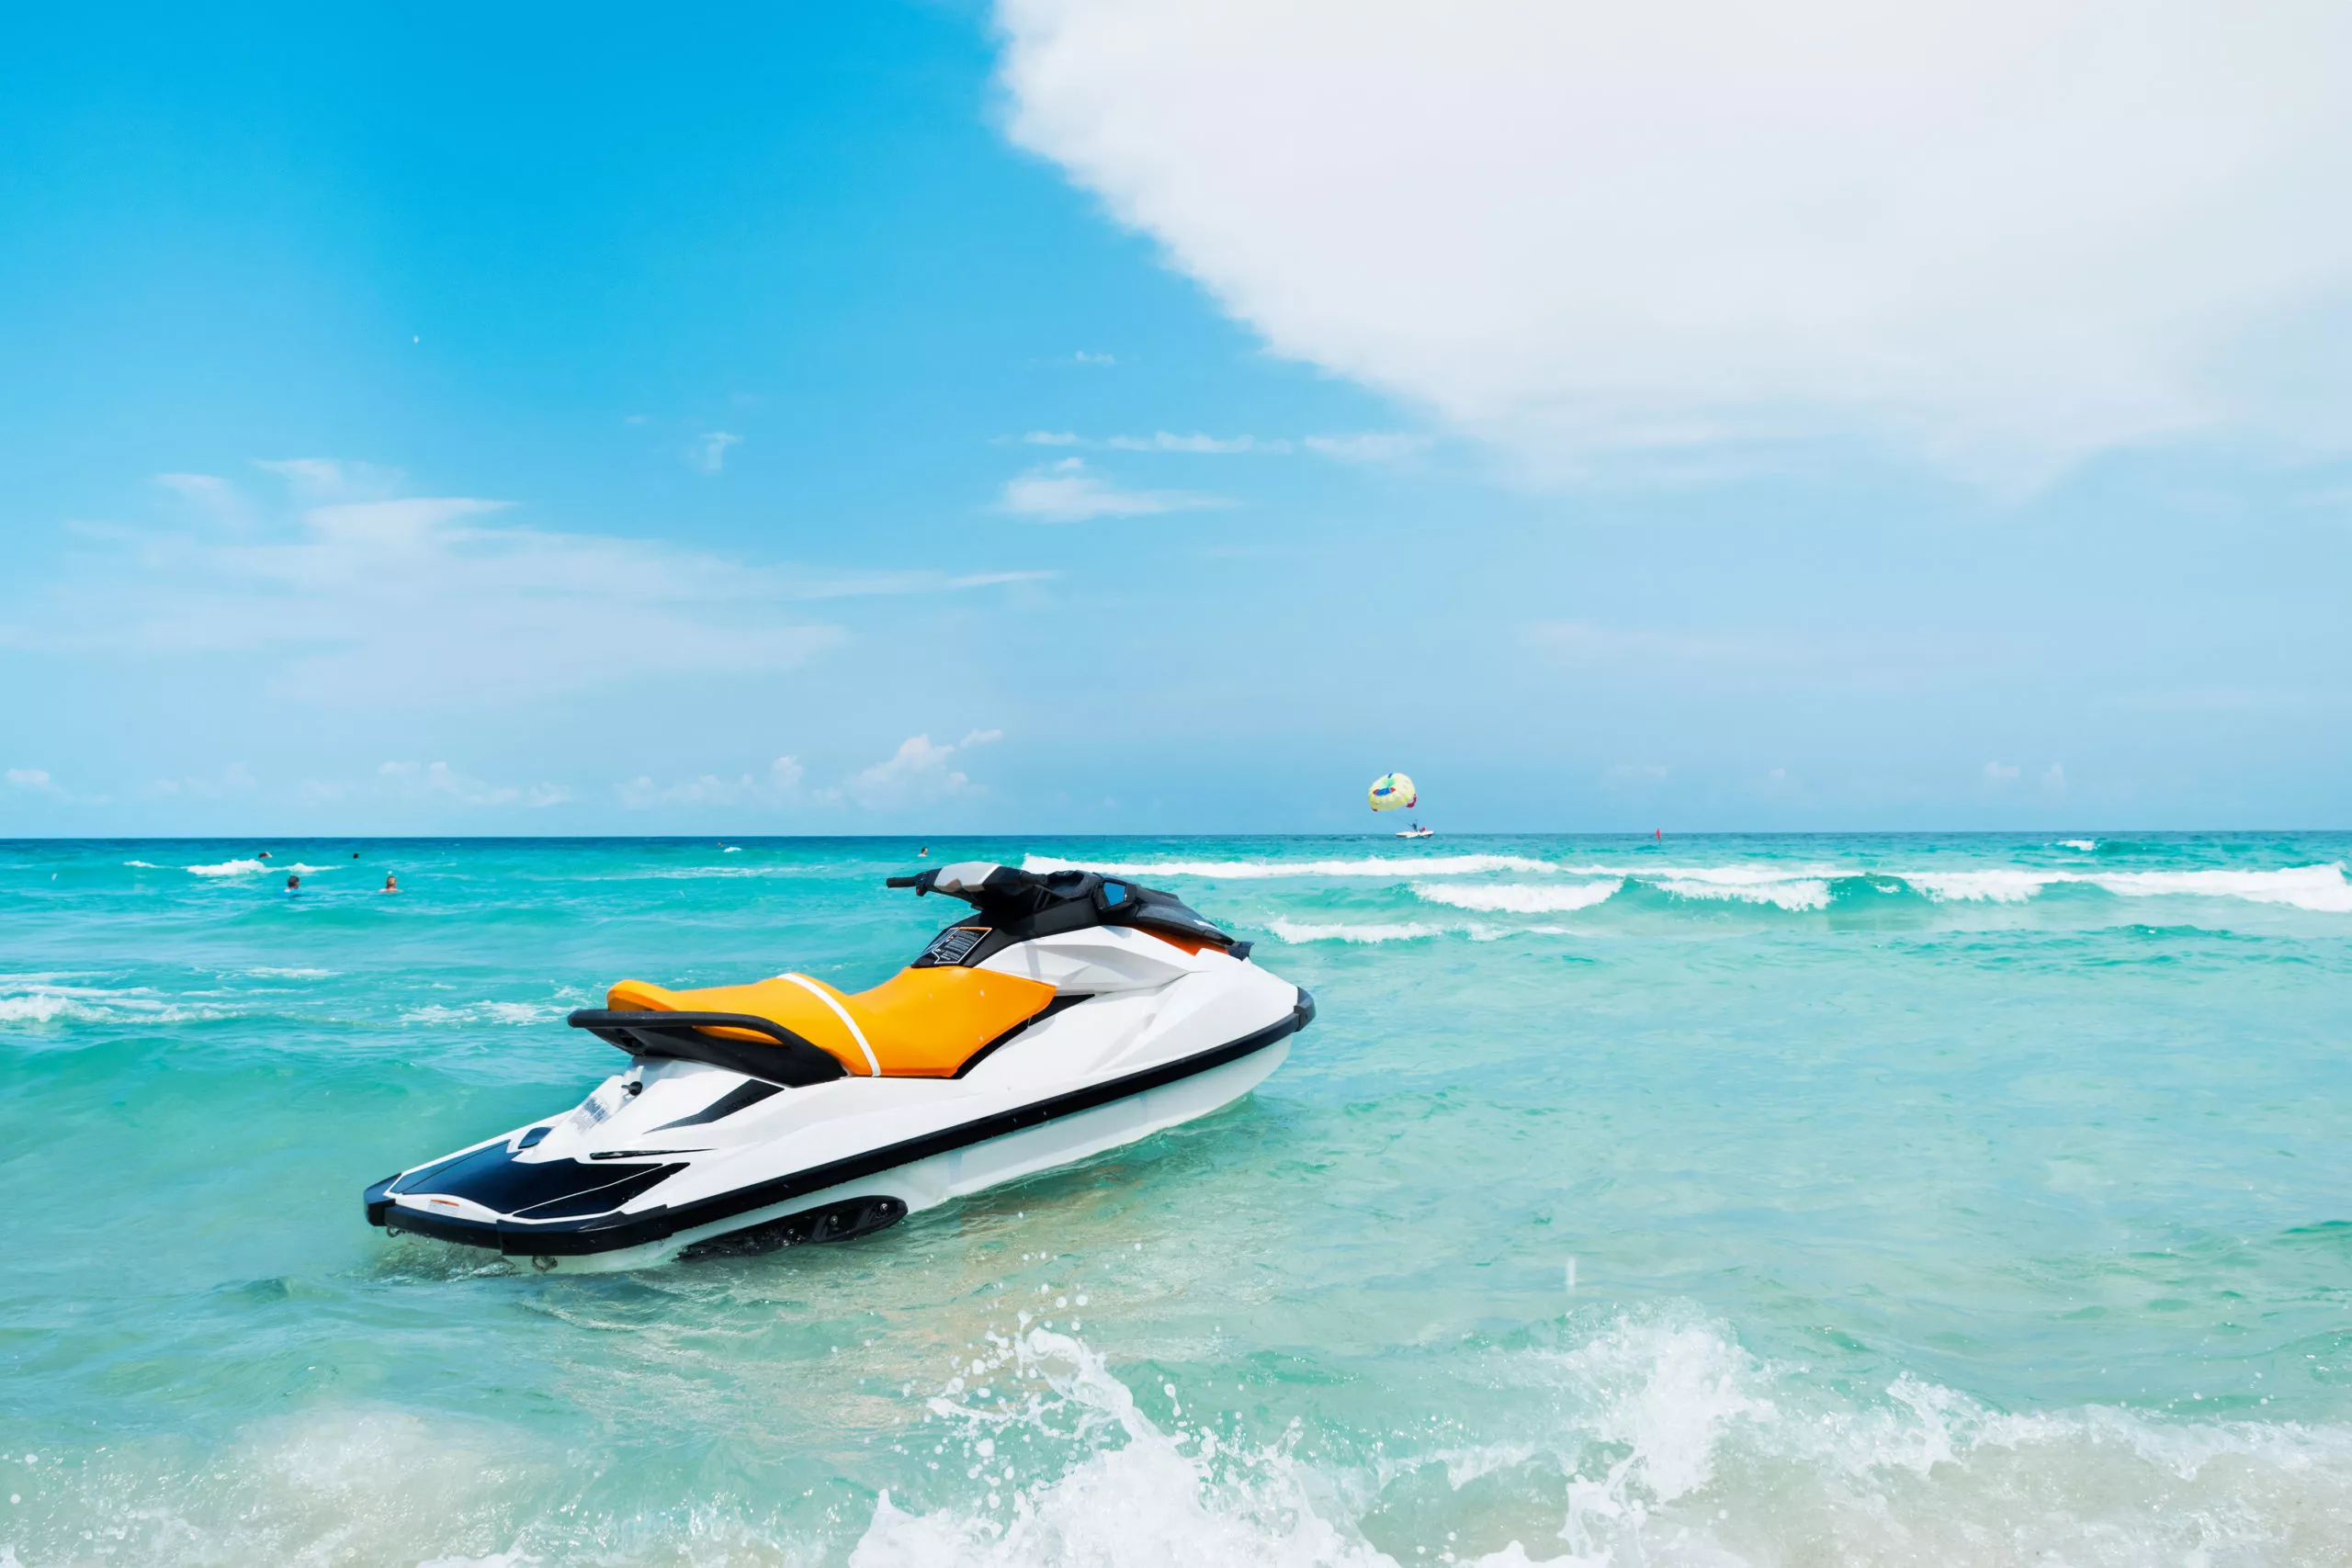 BlueWater Boat Jet Ski Rental Palm Beach in USA, North America | Water Skiing,Jet Skiing - Rated 5.3